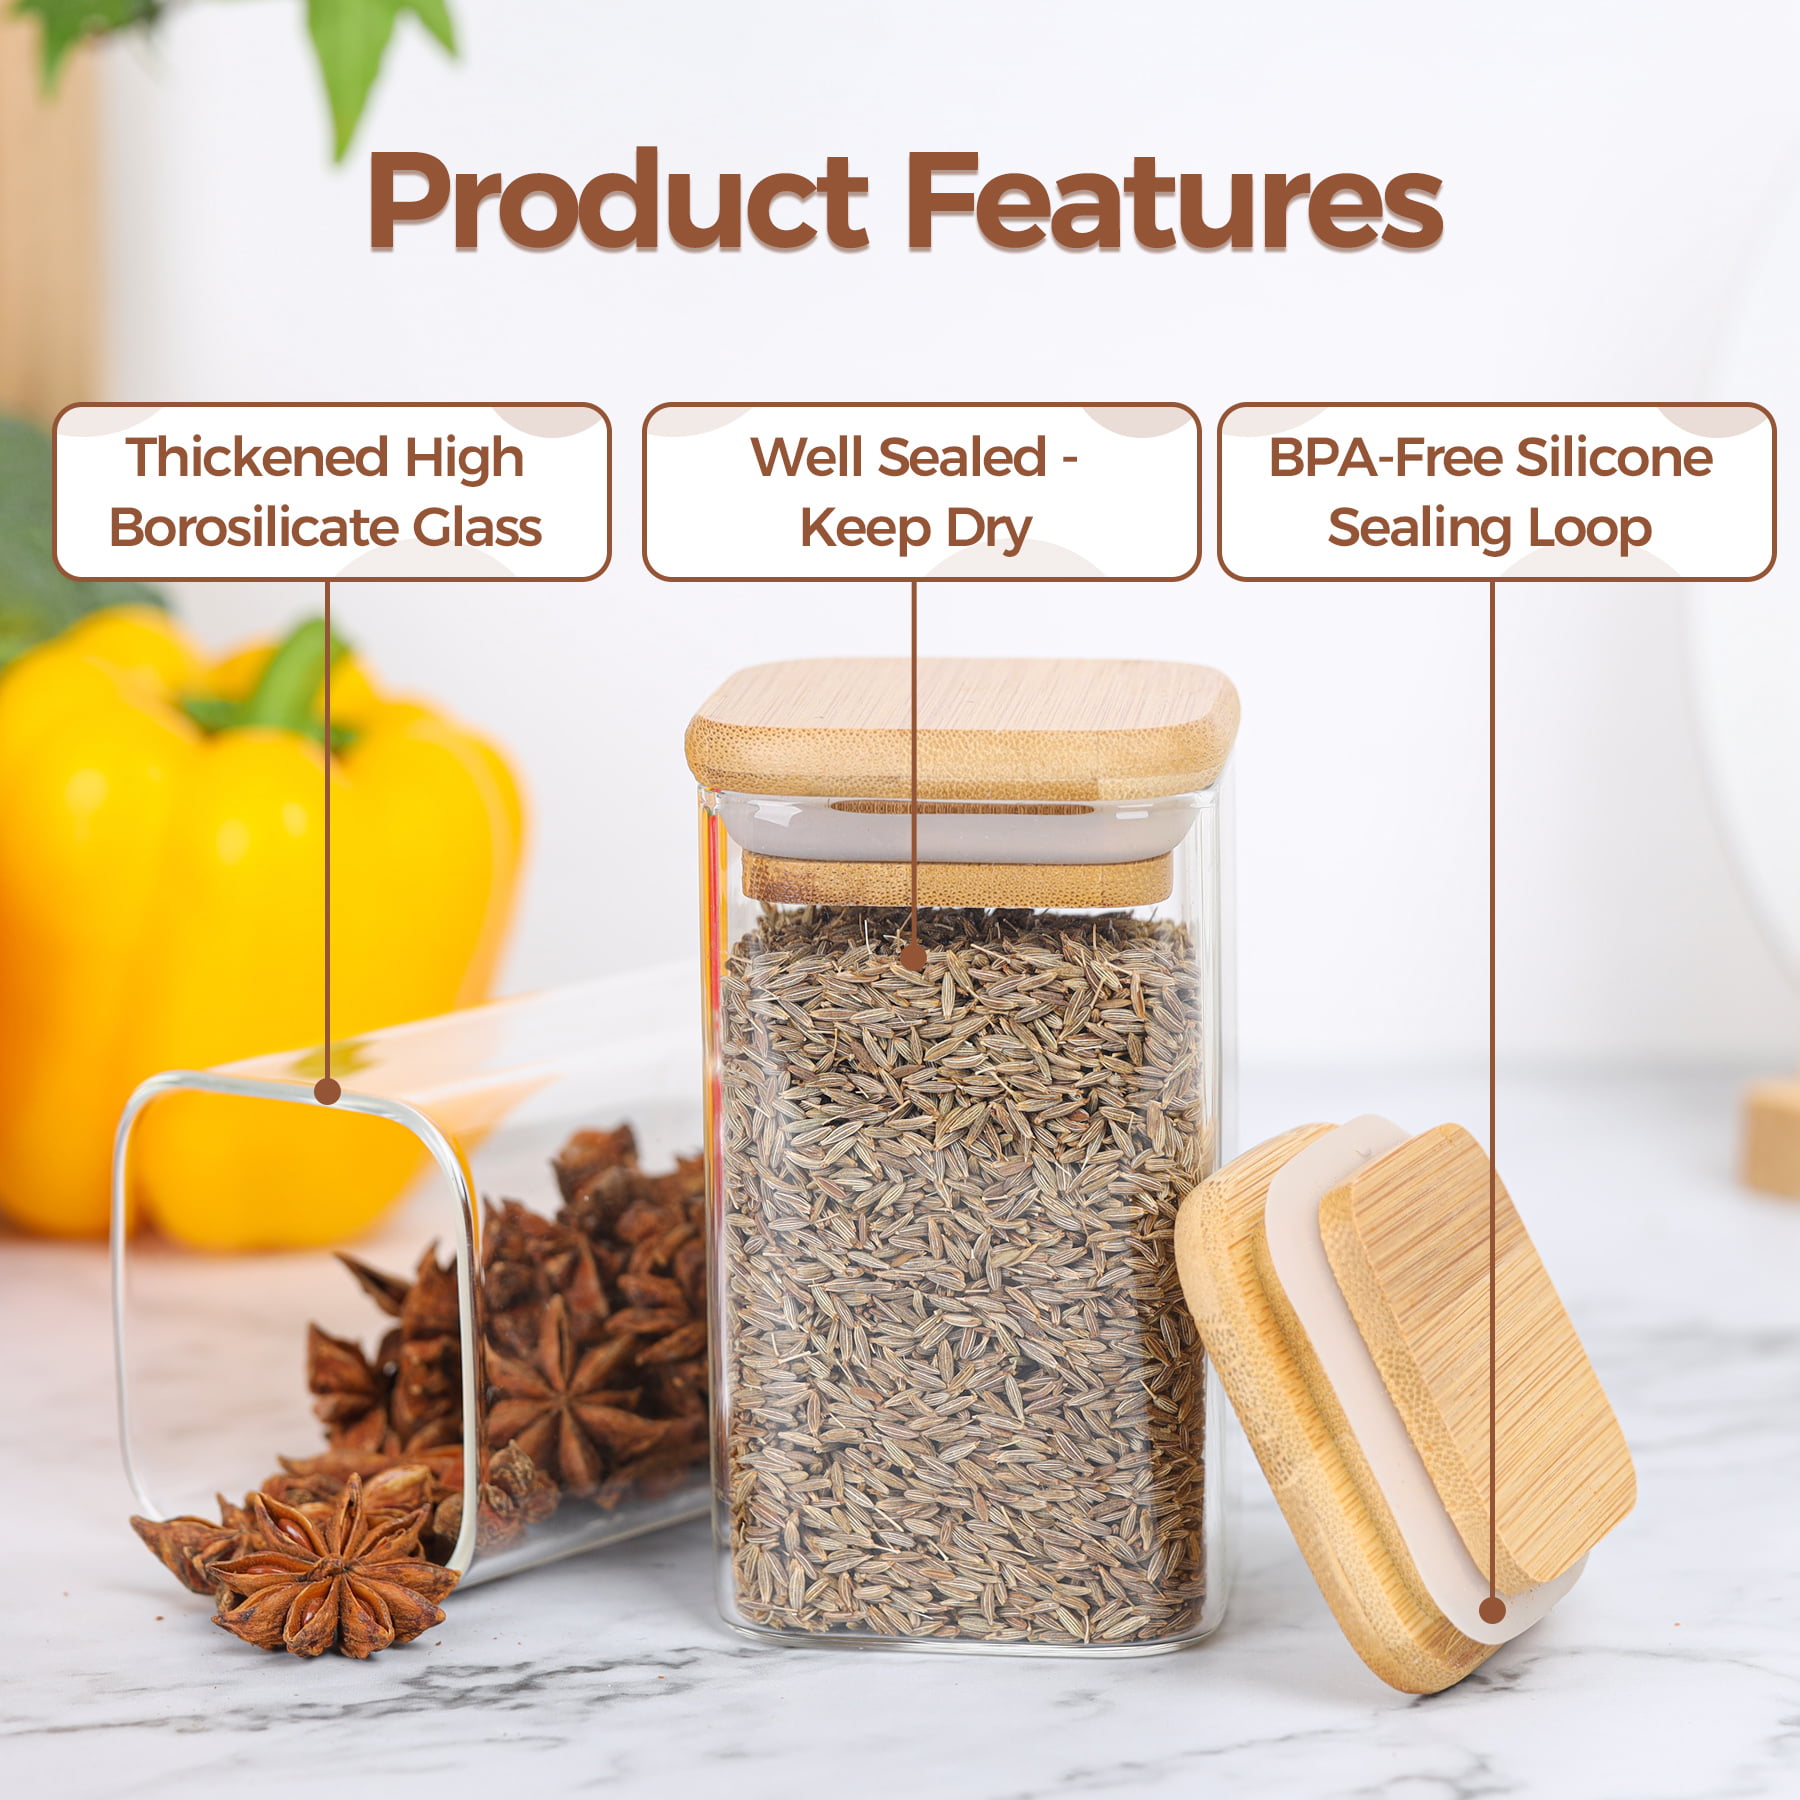 Tafts ROUND Glass Spice Jars & Bottles l 33% Thicker - 12 Pcs Glass Spice -  3 oz or 4oz Empty Glass Spice Seasoning Containers l Shaker Lids and